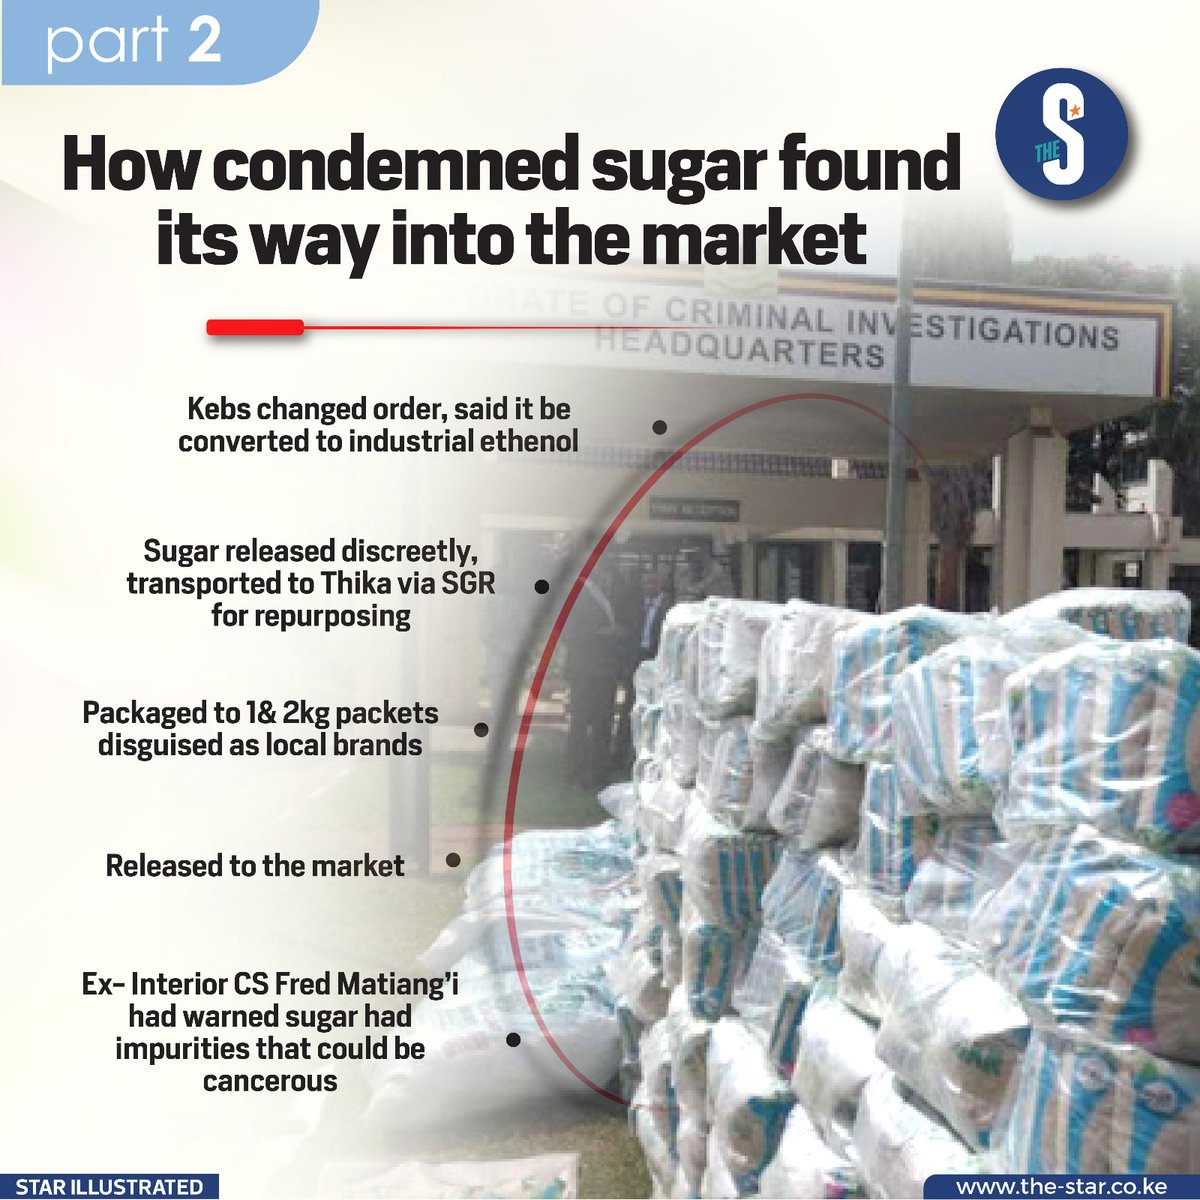 President William Ruto has cracked the whip on 27 officials suspected to have facilitated the entry of illegal 'contaminated' sugar into the Kenyan market.

#StarInfographics